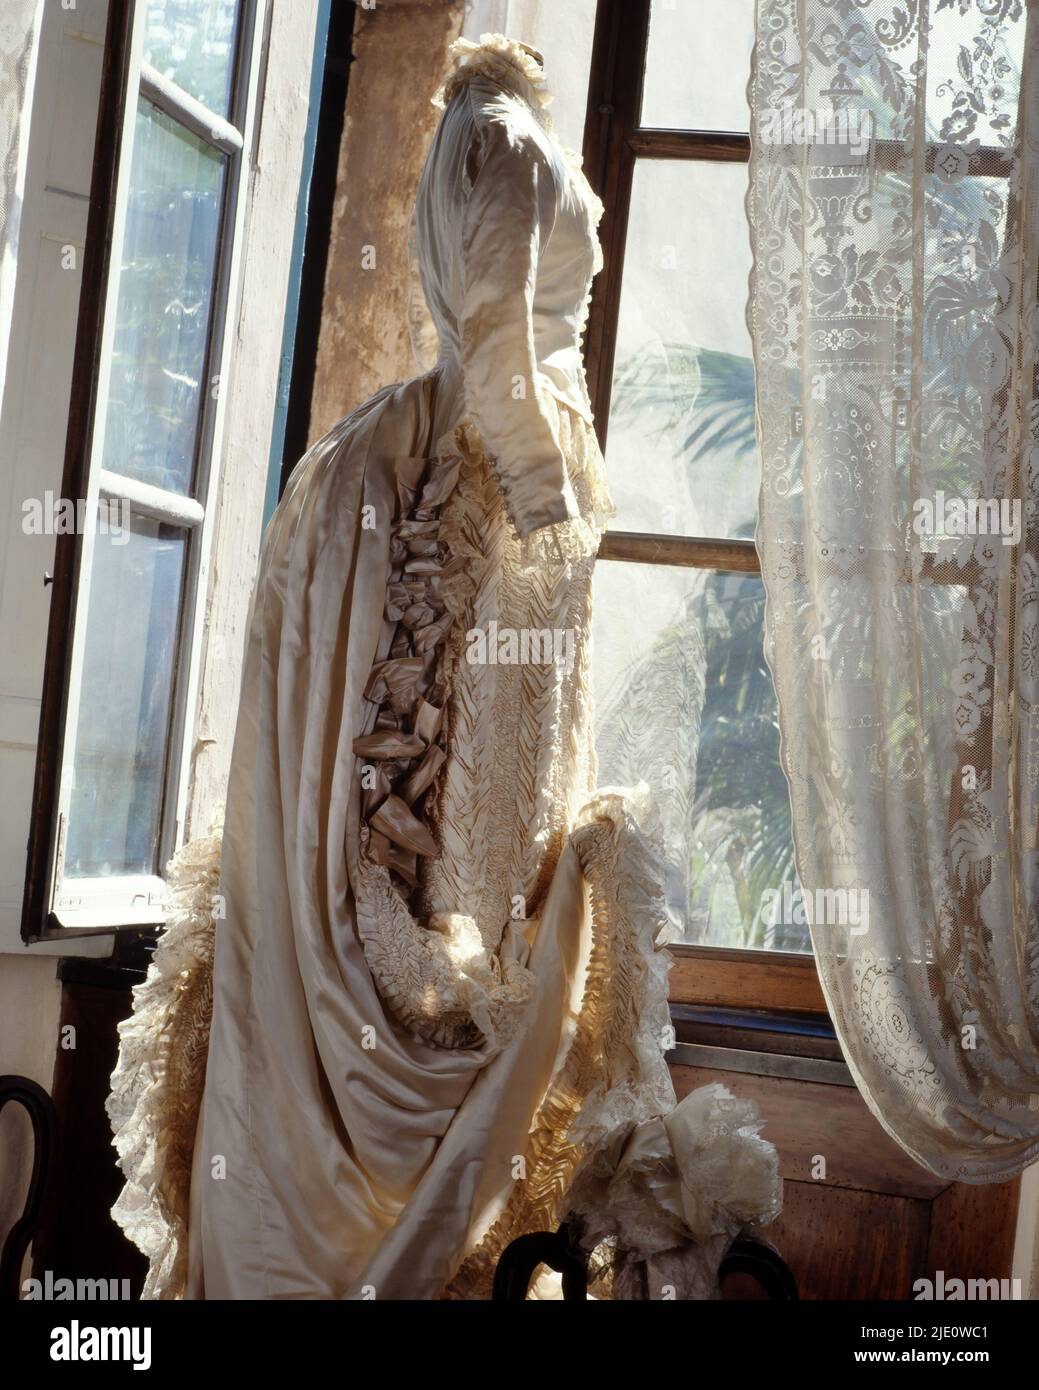 Bridal bouquet, Ancient wedding dresses in ‘Tapissier’ style, so-called for its side decorations, 1880. Stock Photo